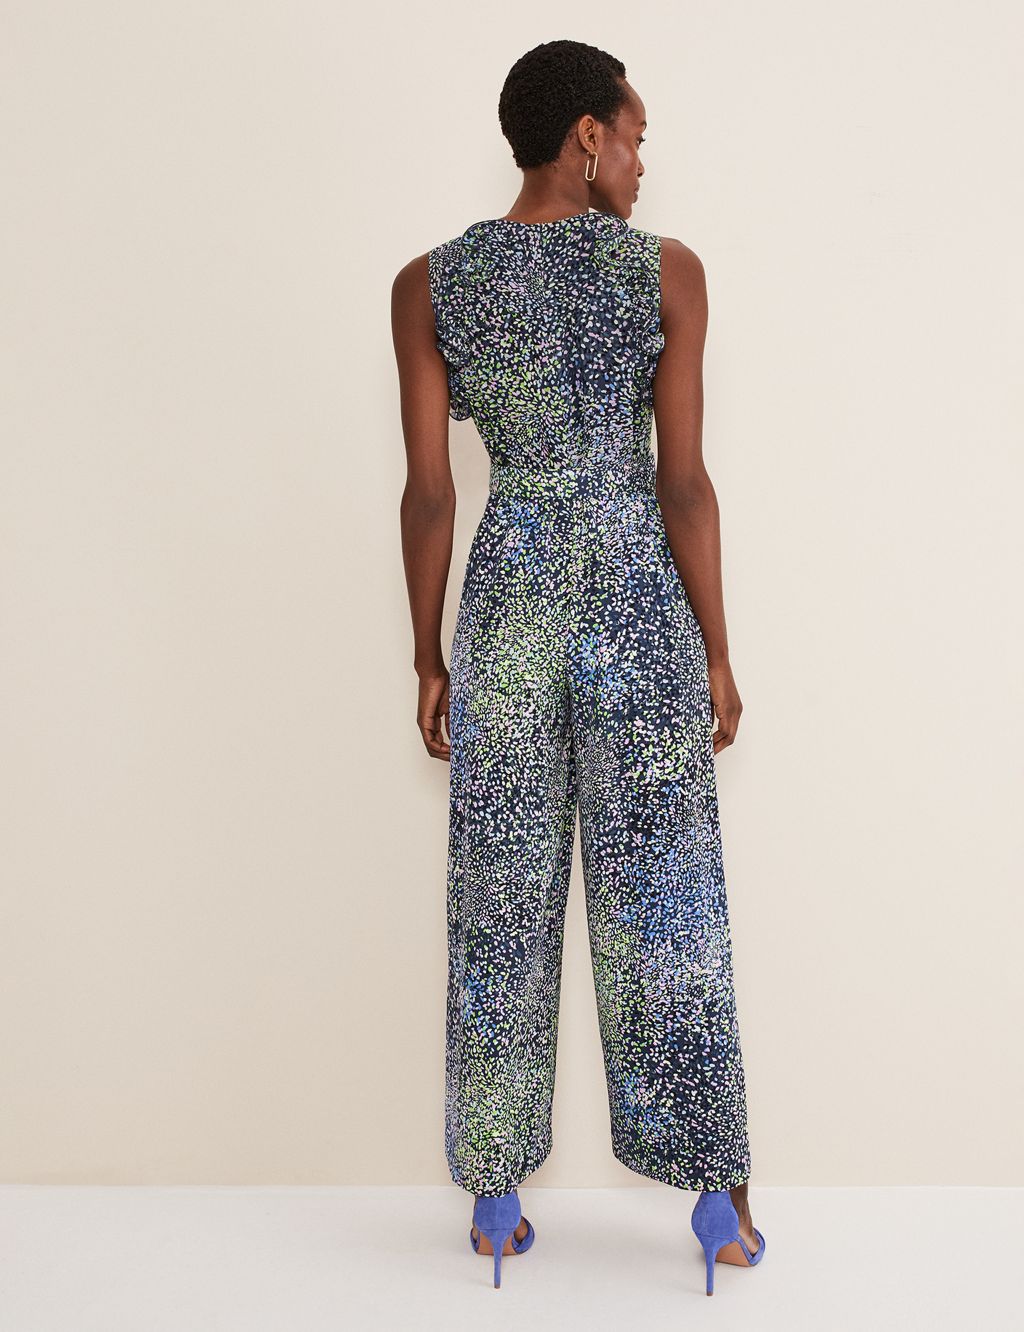 Printed Belted Sleeveless Wide Leg Jumpsuit image 3